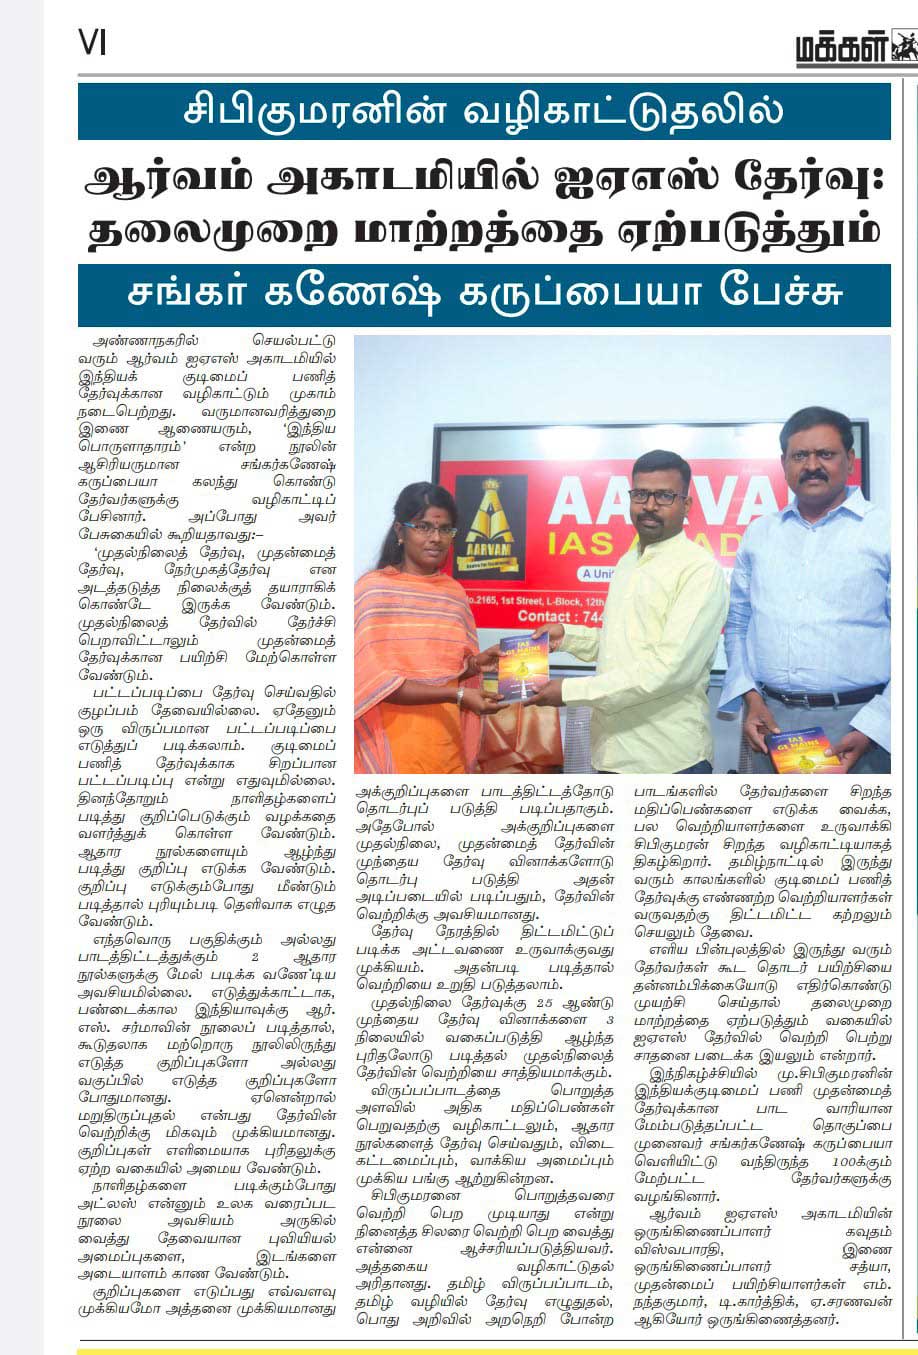 Makkal Kural daily news paper coverage of respected shankar karuppaiah income tax assistant commissioner 